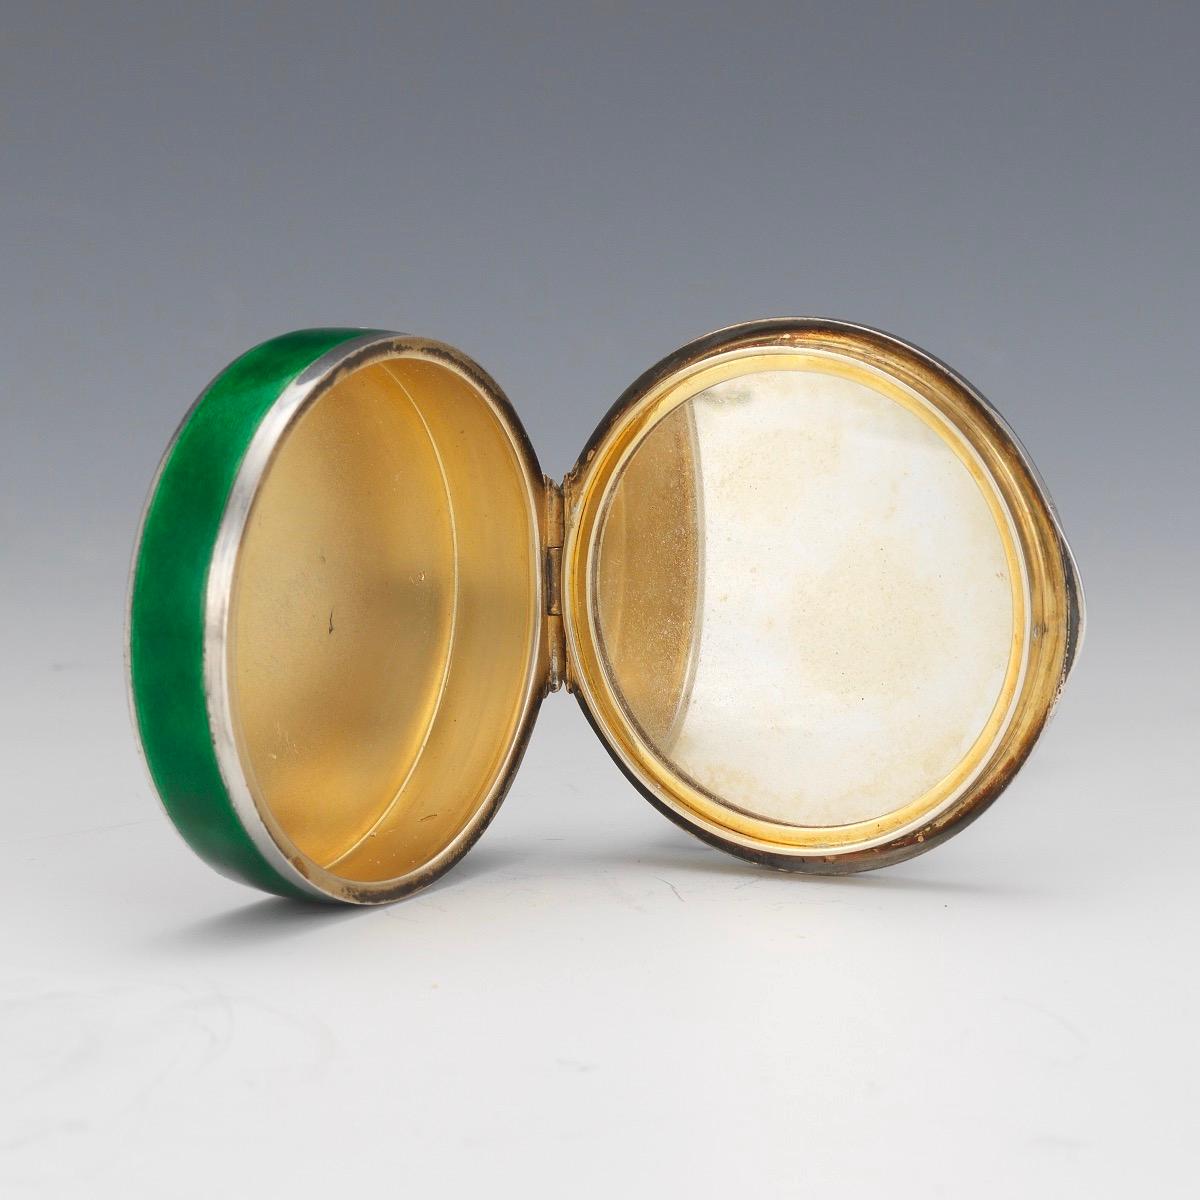 European Early 20th Century Continental Silver Gilt and Green Guilloche Enamel Box